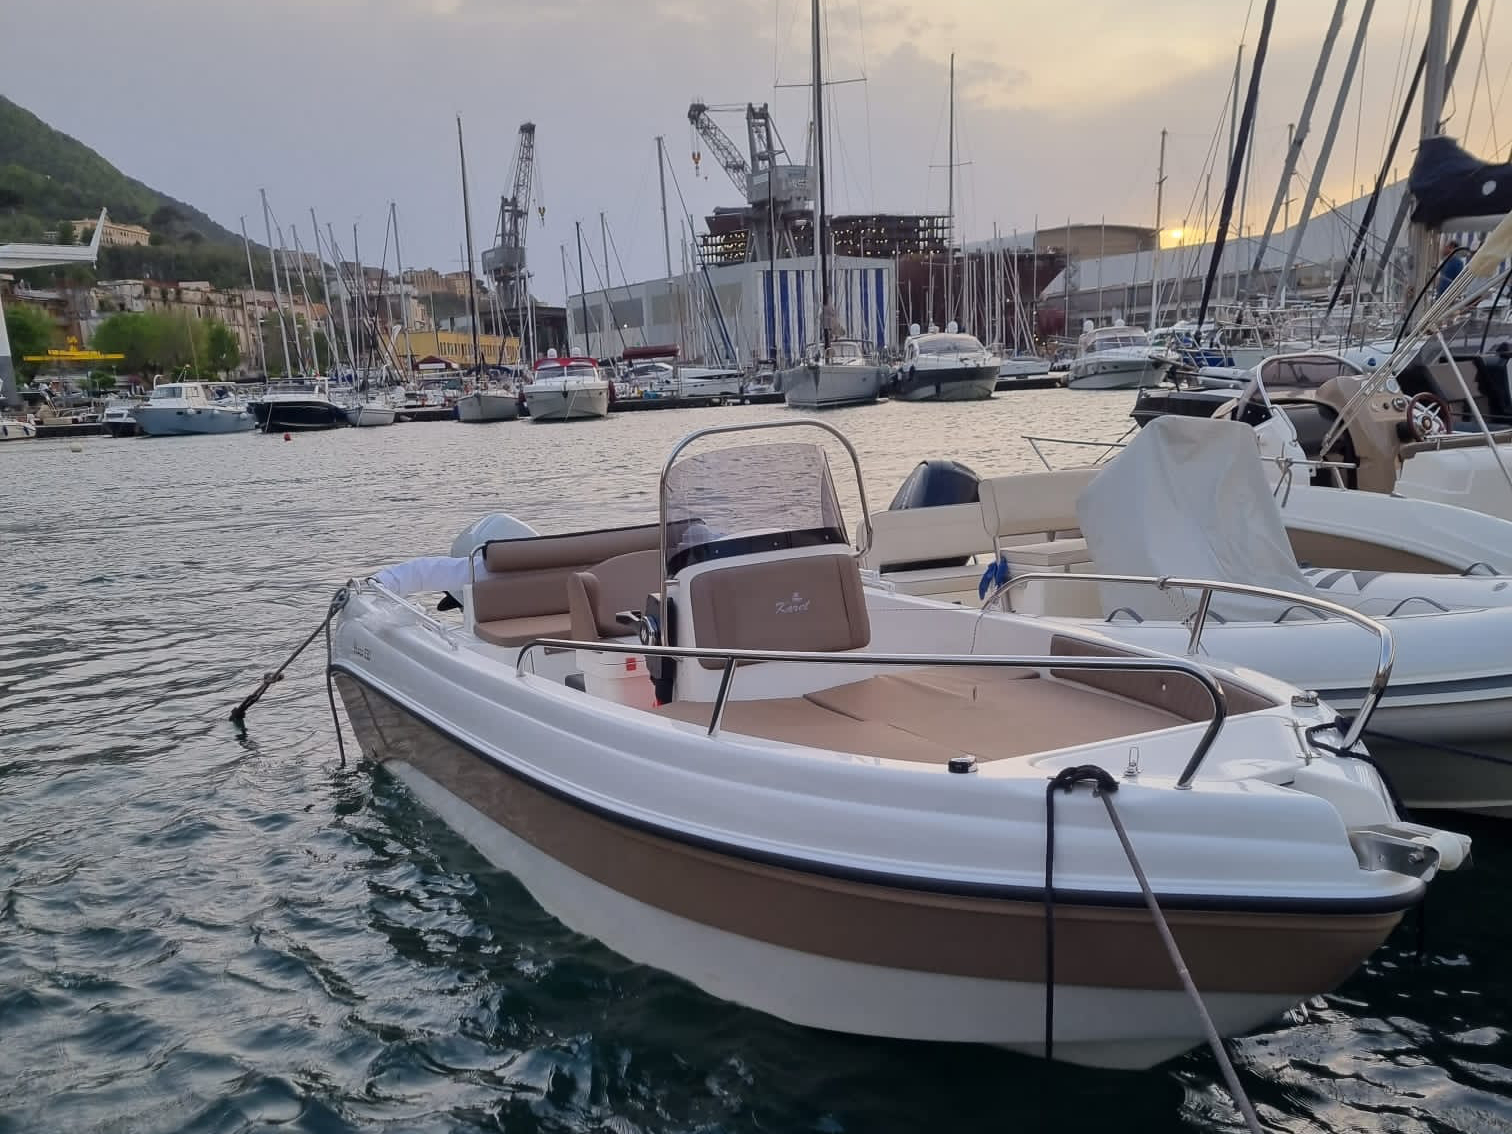 Ithaca 550 - Yacht Charter Naples & Boat hire in Italy Campania Bay of Naples Castellammare di Stabia Porto di Castellammare di Stabia 1